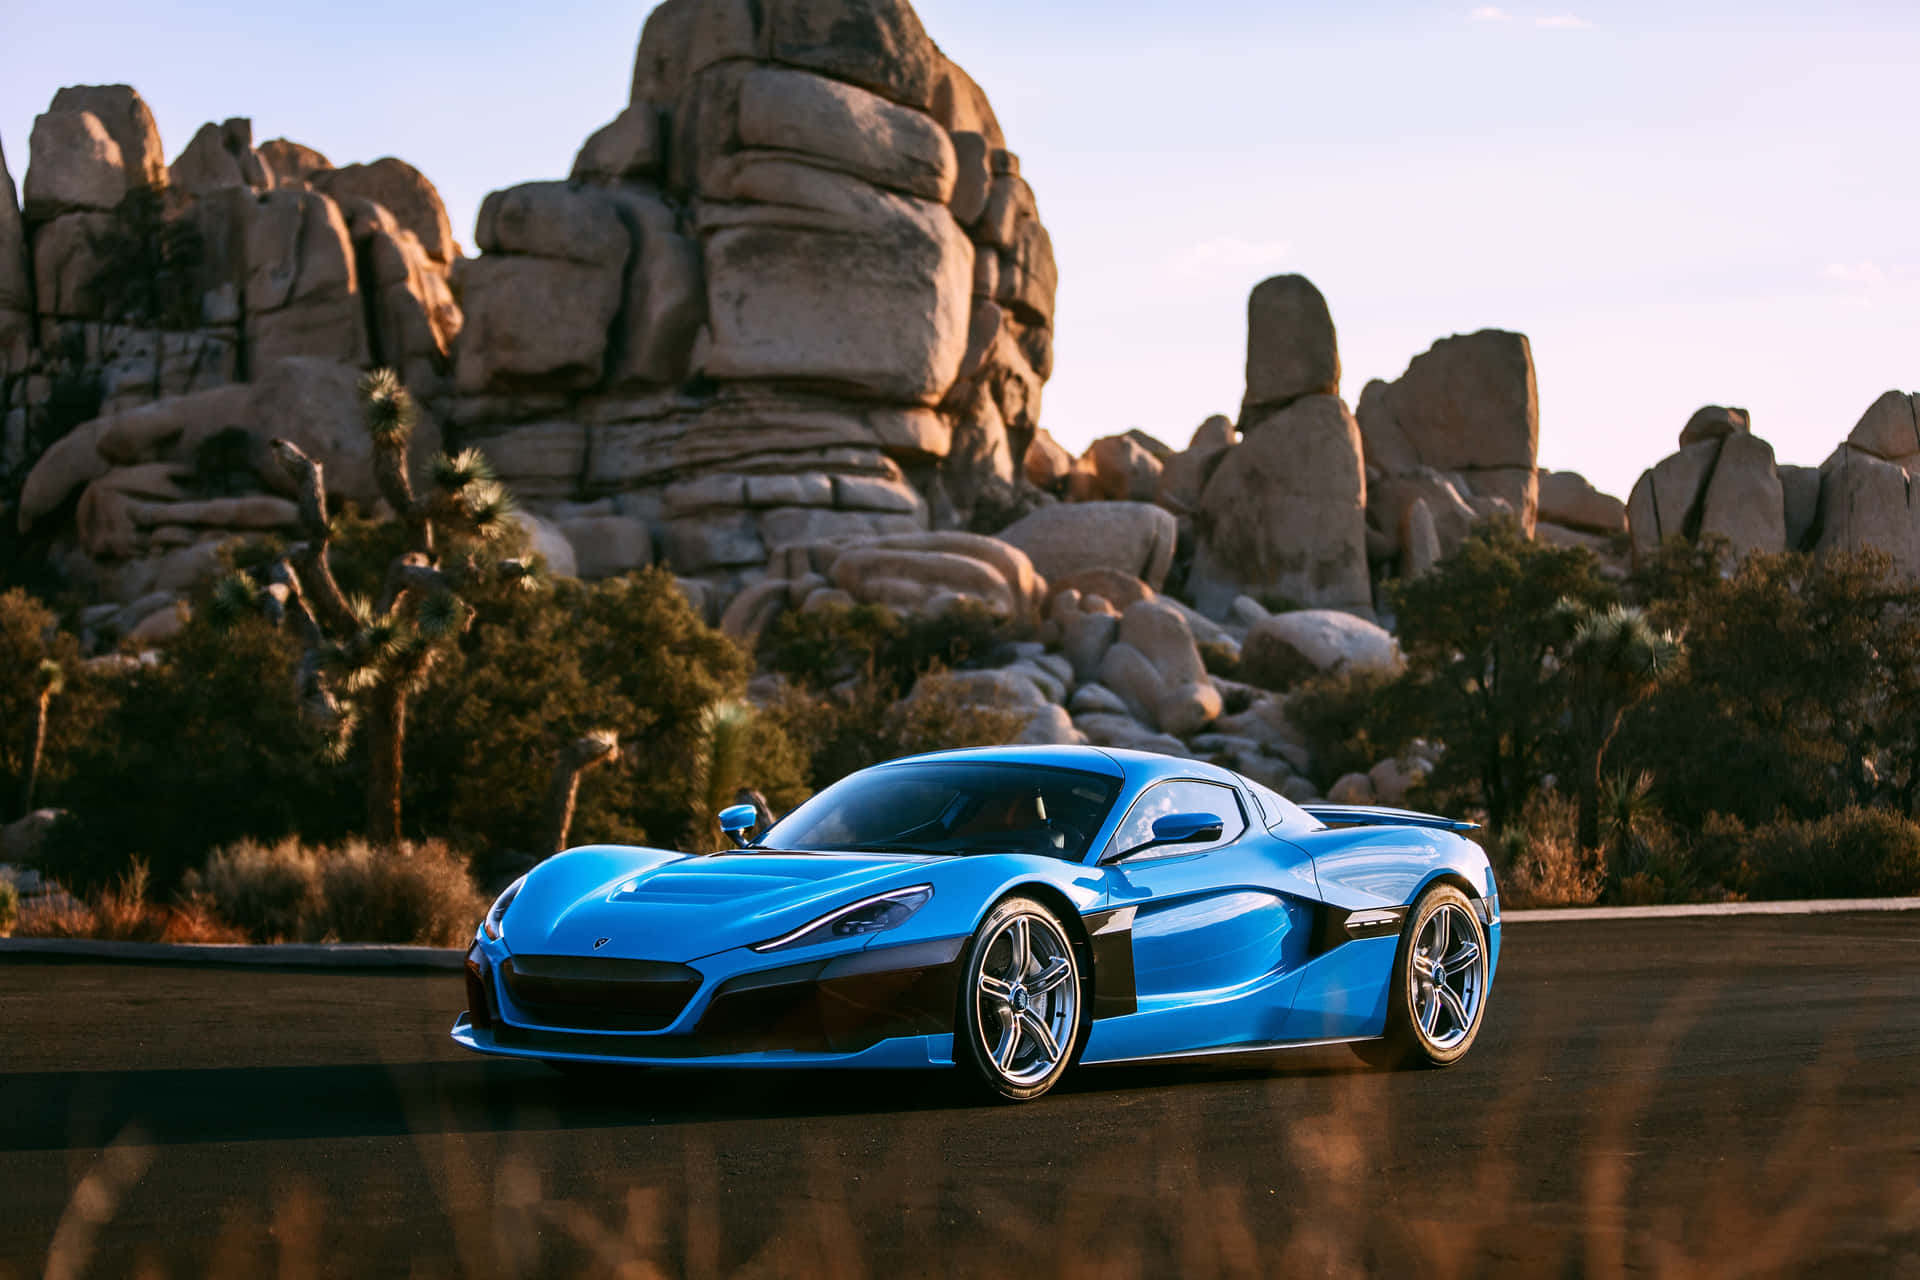 Caption: Rimac C_Two Electric Hypercar in Action Wallpaper